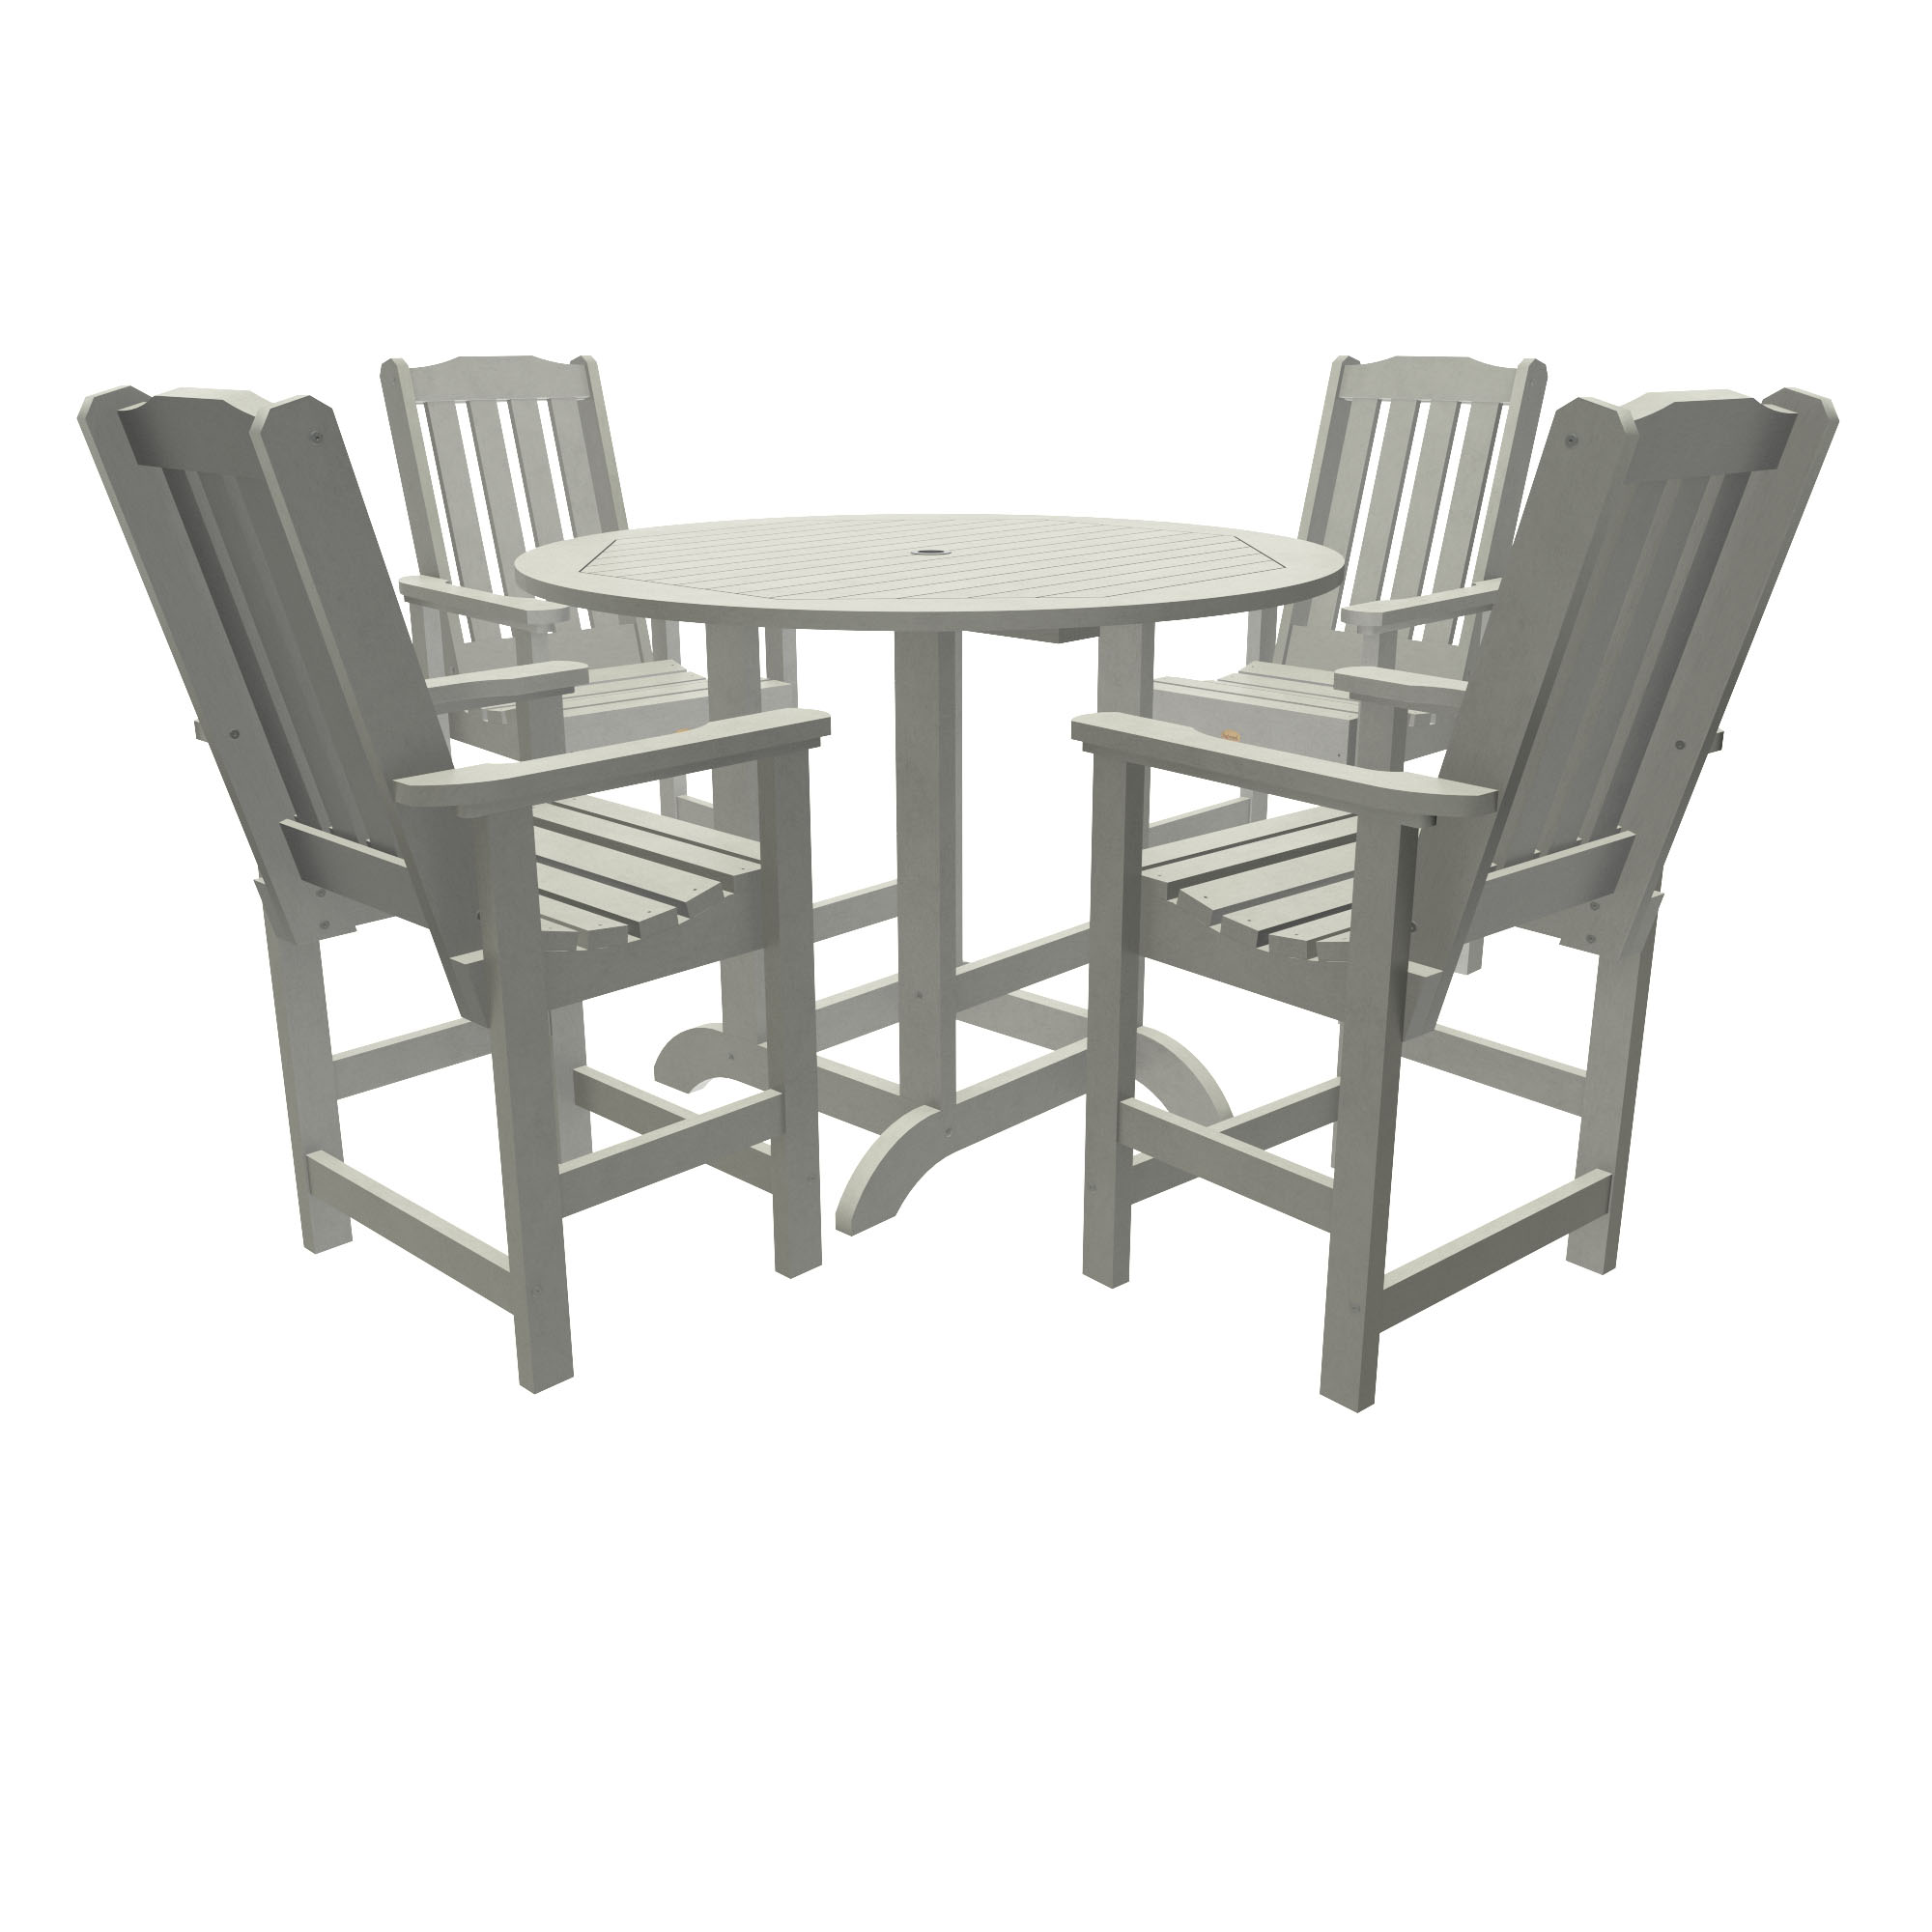 Highwood 5pc Lehigh Round Dining Set - Counter Height - image 1 of 6